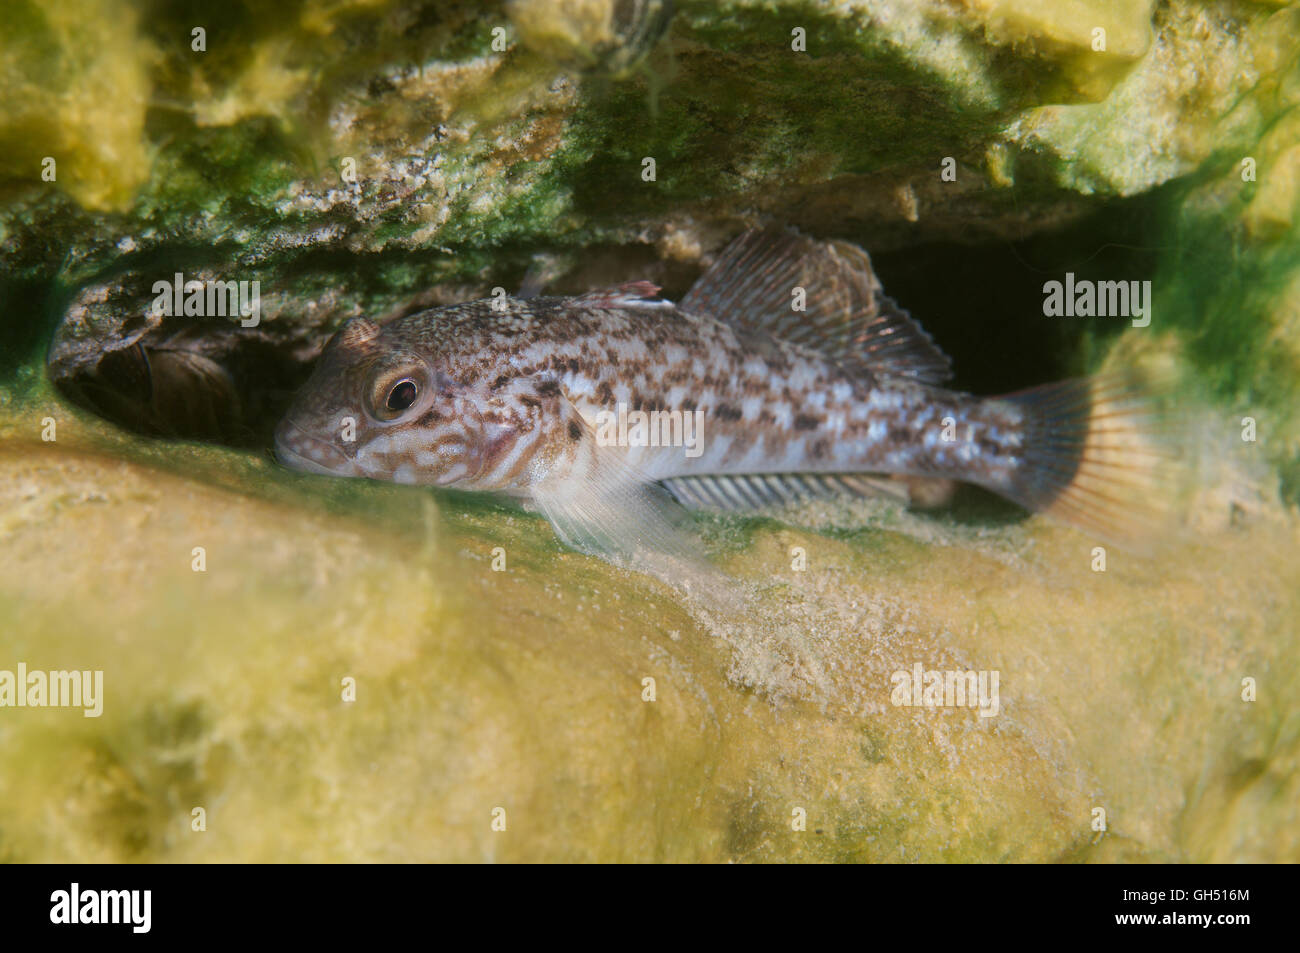 Round goby, Black spotted goby, Caspian round goby or Ginger goby (Neogobius melanostomus) Eastern Europe Stock Photo